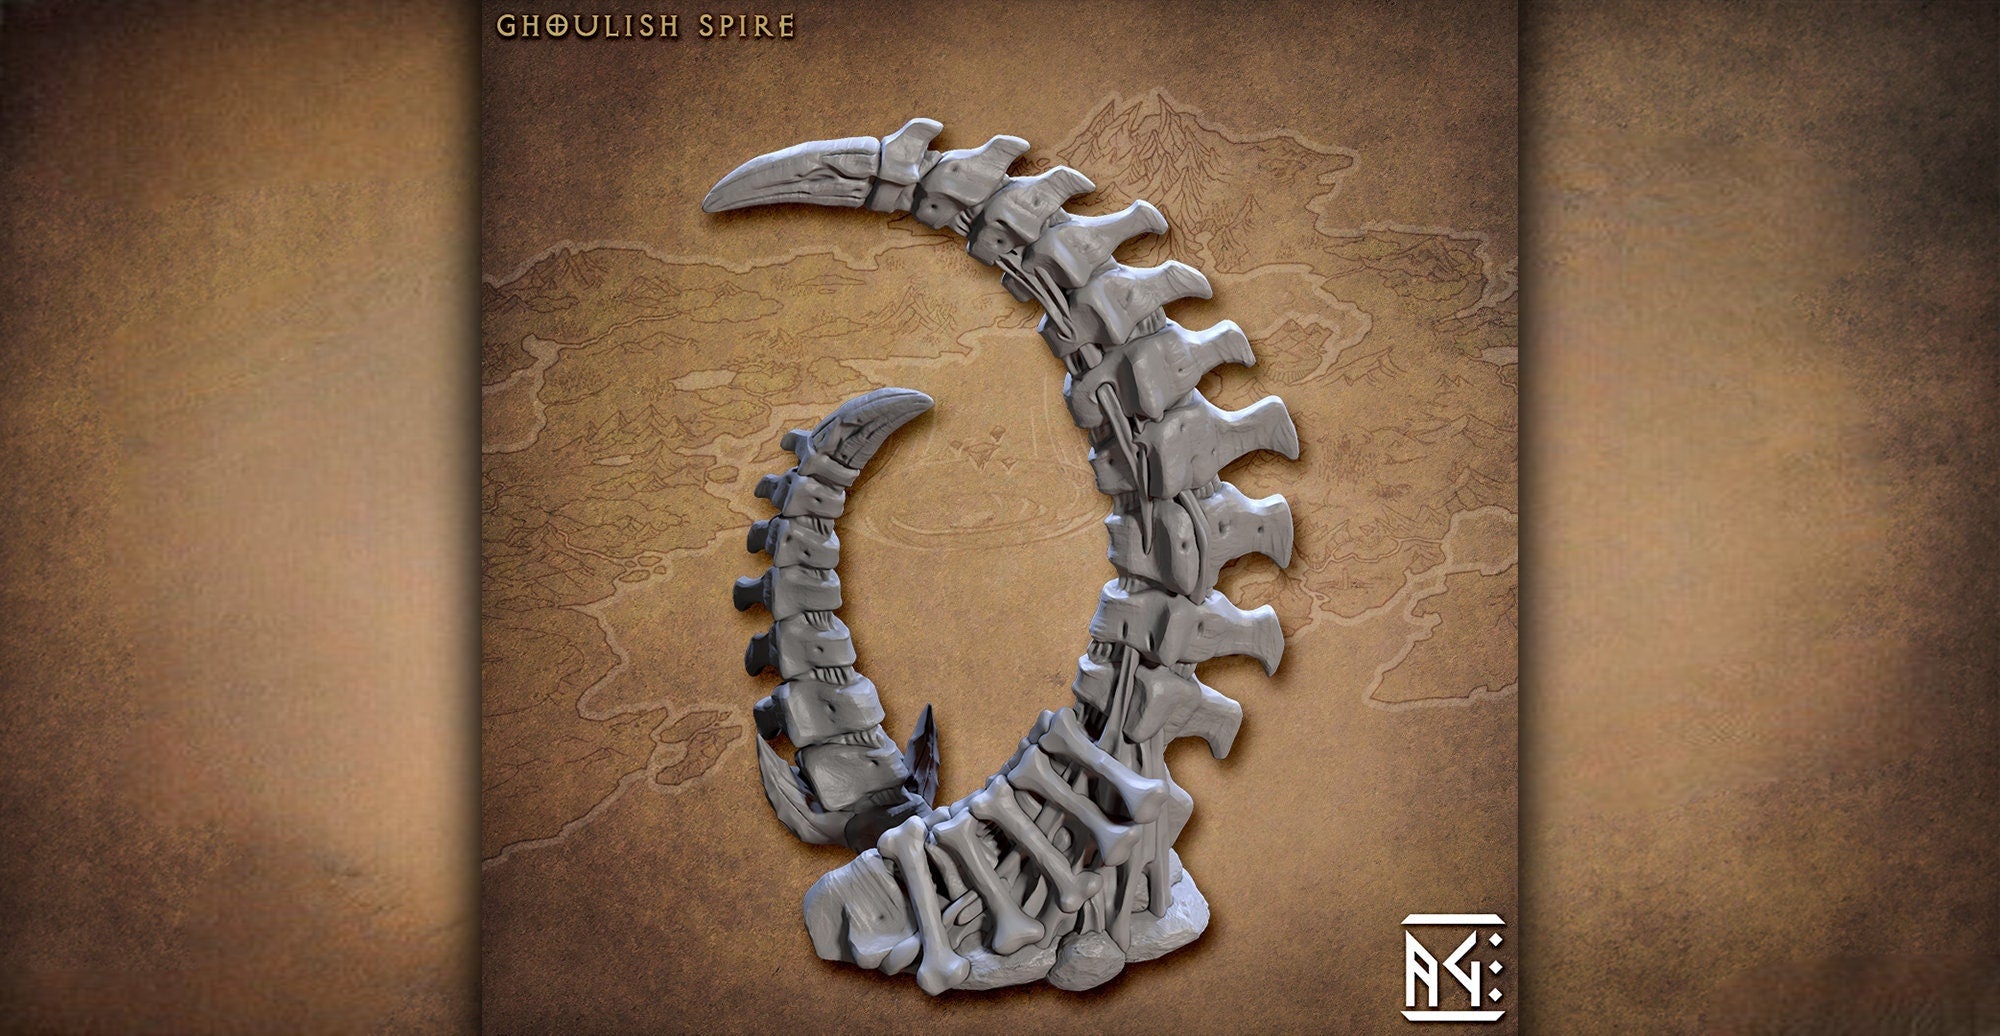 Terrain Scatter Spine "Ghoulish Terrain" | 8K 3D Print | Dungeons and Dragons | DnD | Pathfinder | Tabletop | RPG | Hero Size | 28-32 mm-Role Playing Miniatures